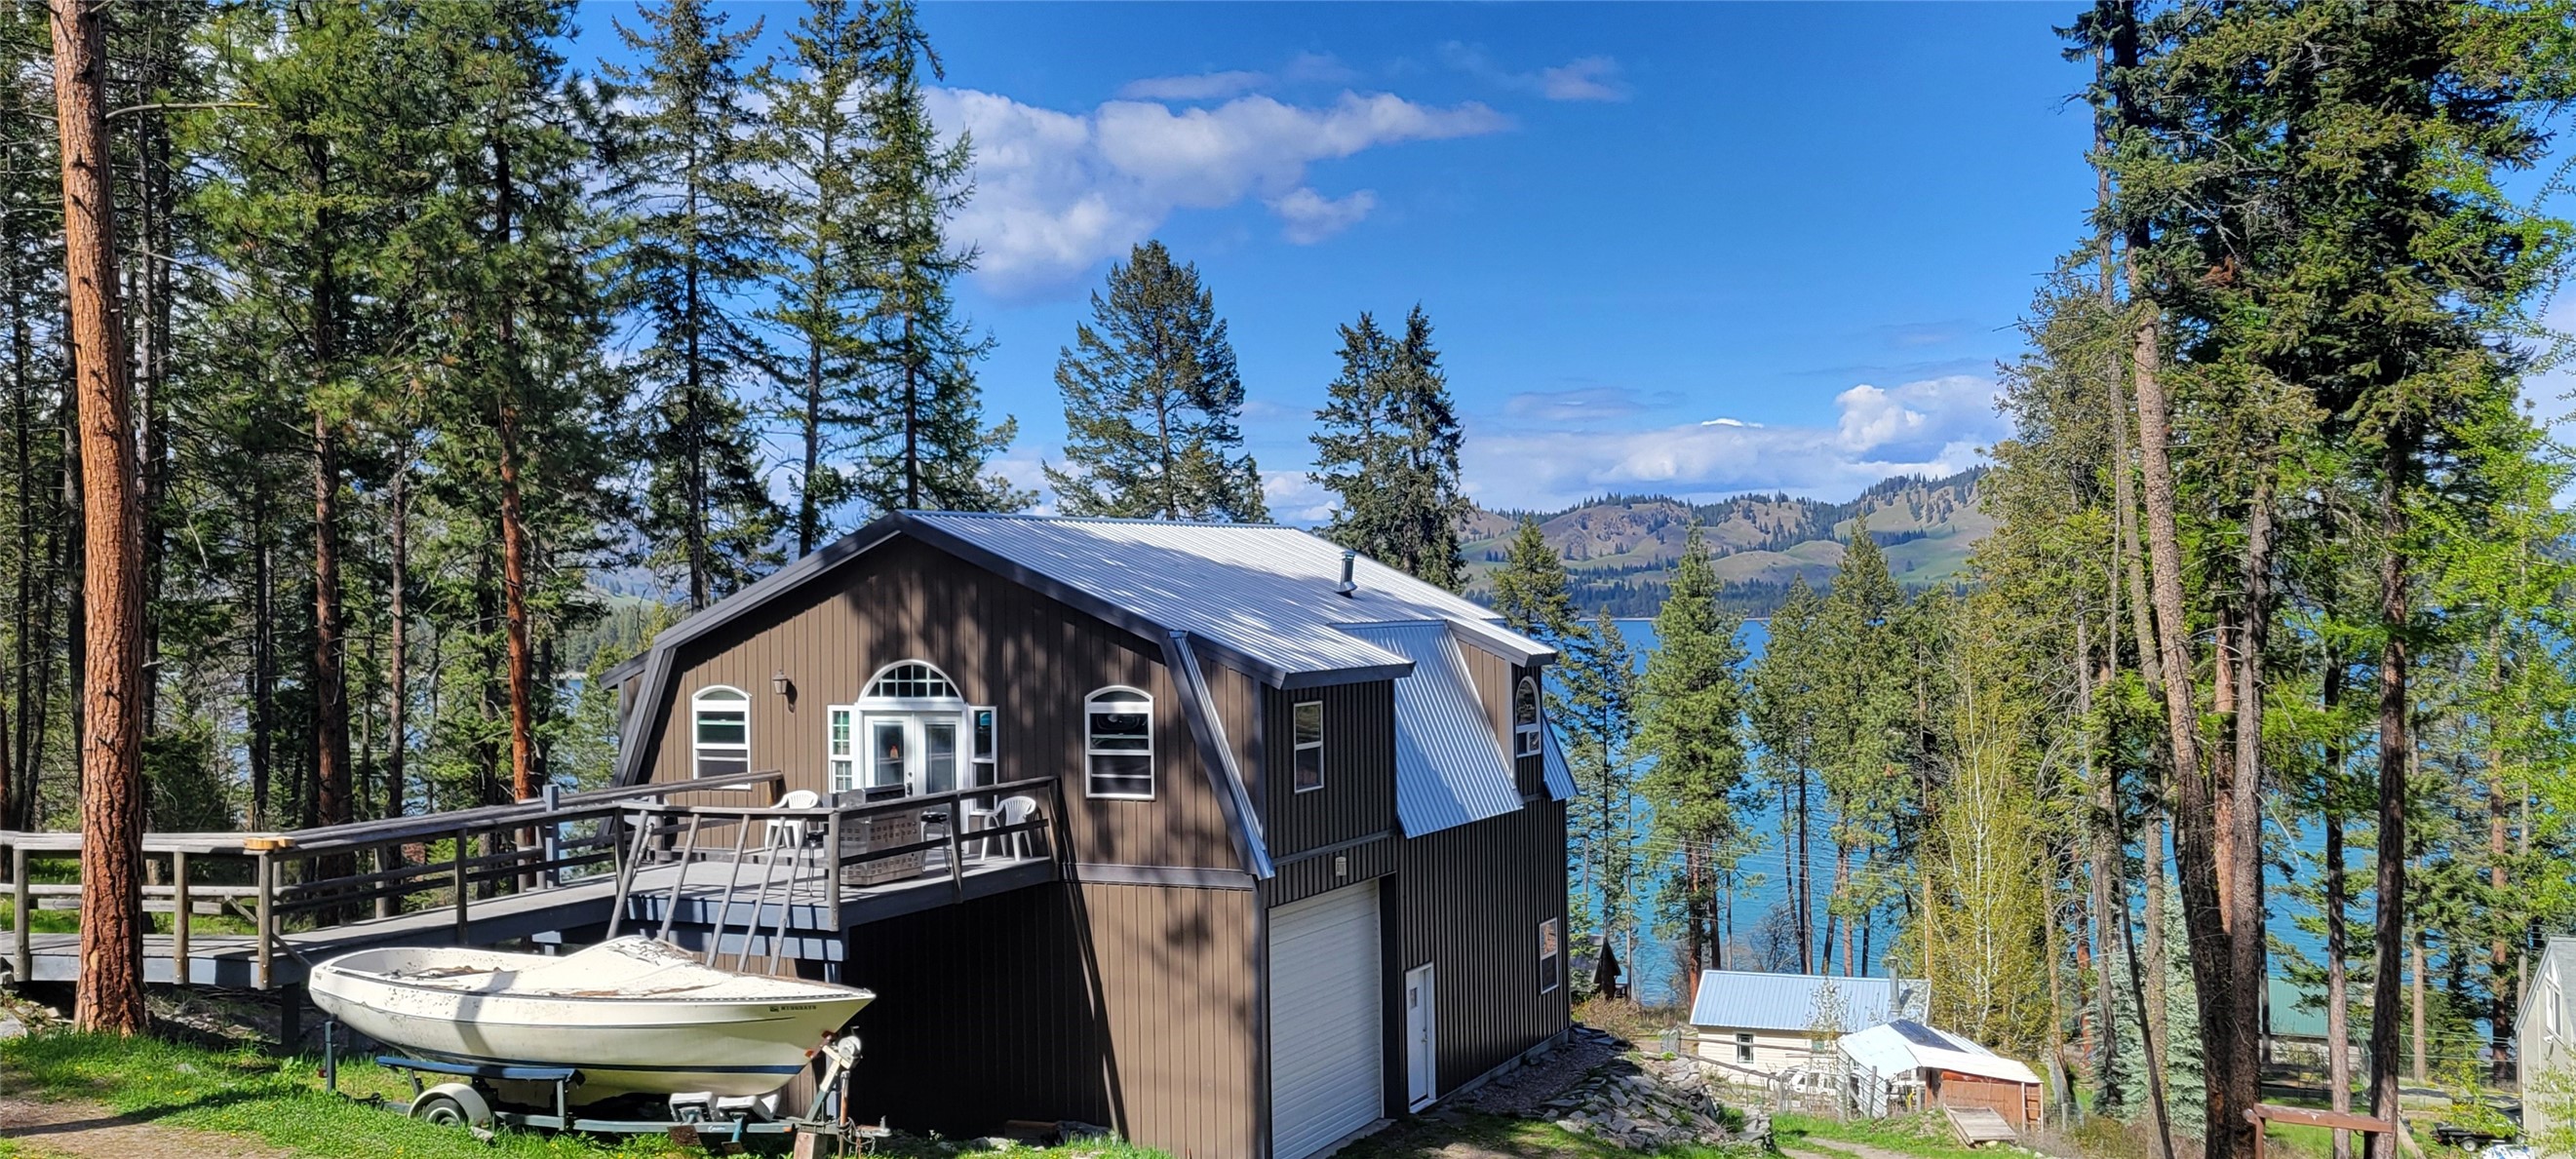 Special 3 season destination property, having deeded common lake access to boat and play on Flathead Lake. Views through the trees to Dream Island, with lots of potential to personalize your own scene. Newer shop with living quarters plus an original 1 bedroom cabin on a 3.7 ac. lot just 15 minutes north of Polson. The "shouse" 1st level has a 12'hi overhead door, work shop consists of 50% of that level w 220 A/S. Remainder of ground floor has 1BR, 1Ba, and a sunroom. Upper (main floor) combines beautiful vaulted ceilings, custom cabinetry and woodworks, a wet bar, dining area, kitchen w propane range, subzero refrigerator, freezer. 1 main floor bedrm, a3/4 ba, laundry & bonus room, w free standing oil stove, and glass  doors. Fronting Melita Isl Rd, a charming renovated 1930 cabin w plank wood floors, kitchen, 3/4 Ba, covered sitting porch. Great Rental hs. Many personal affects in "shouse" can be included, negotiated, or moved. Shared engineered septic system,  Shared private well.